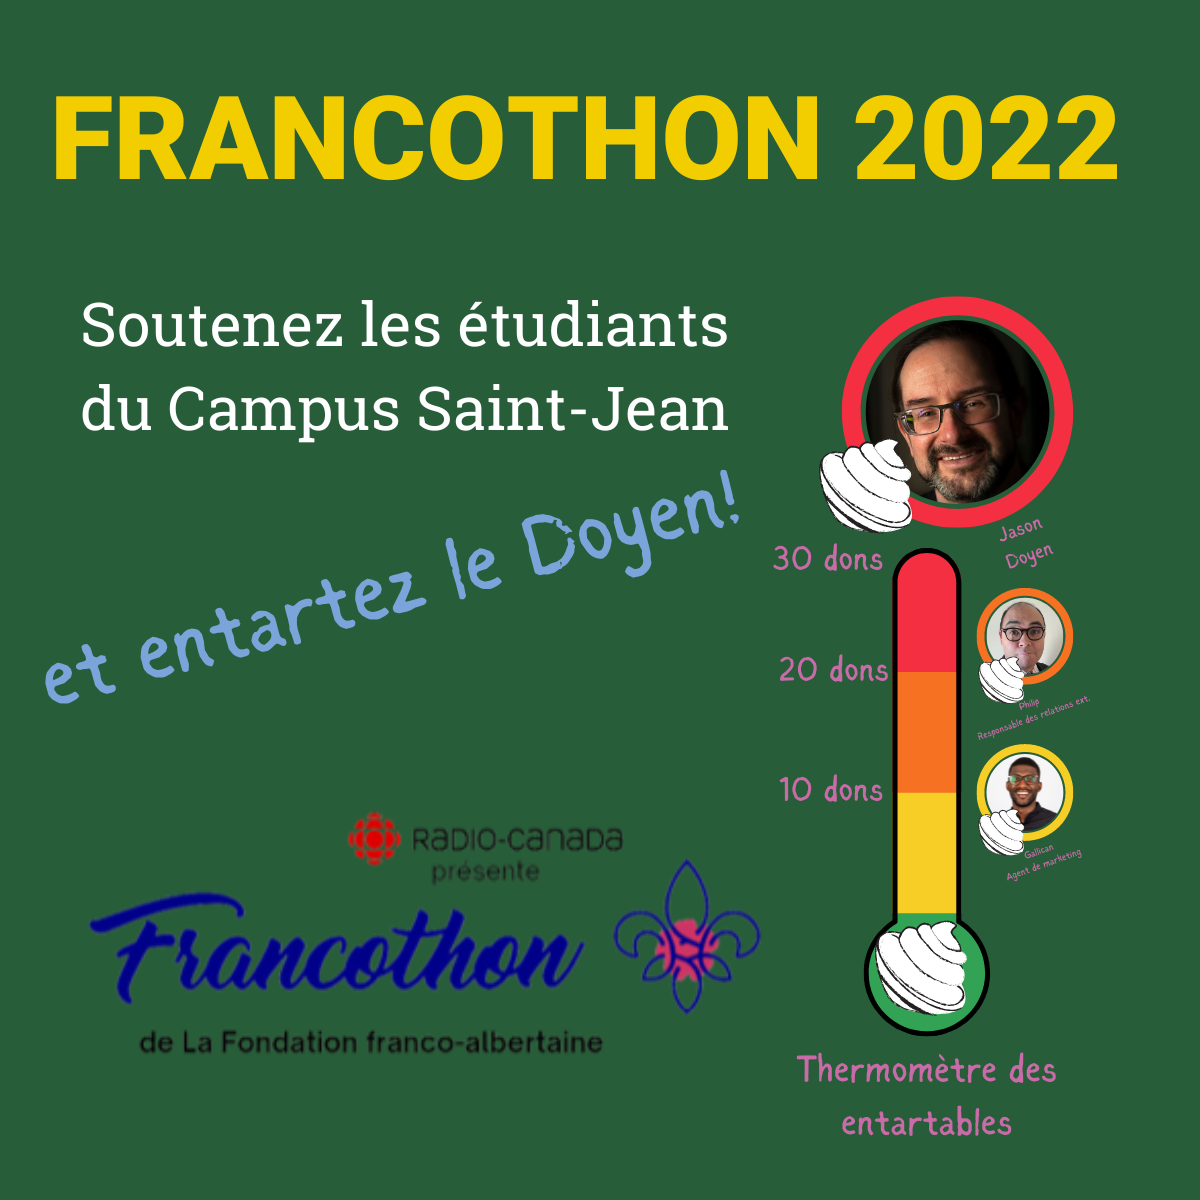 francothon-3840--1080-px-4--4-in.png